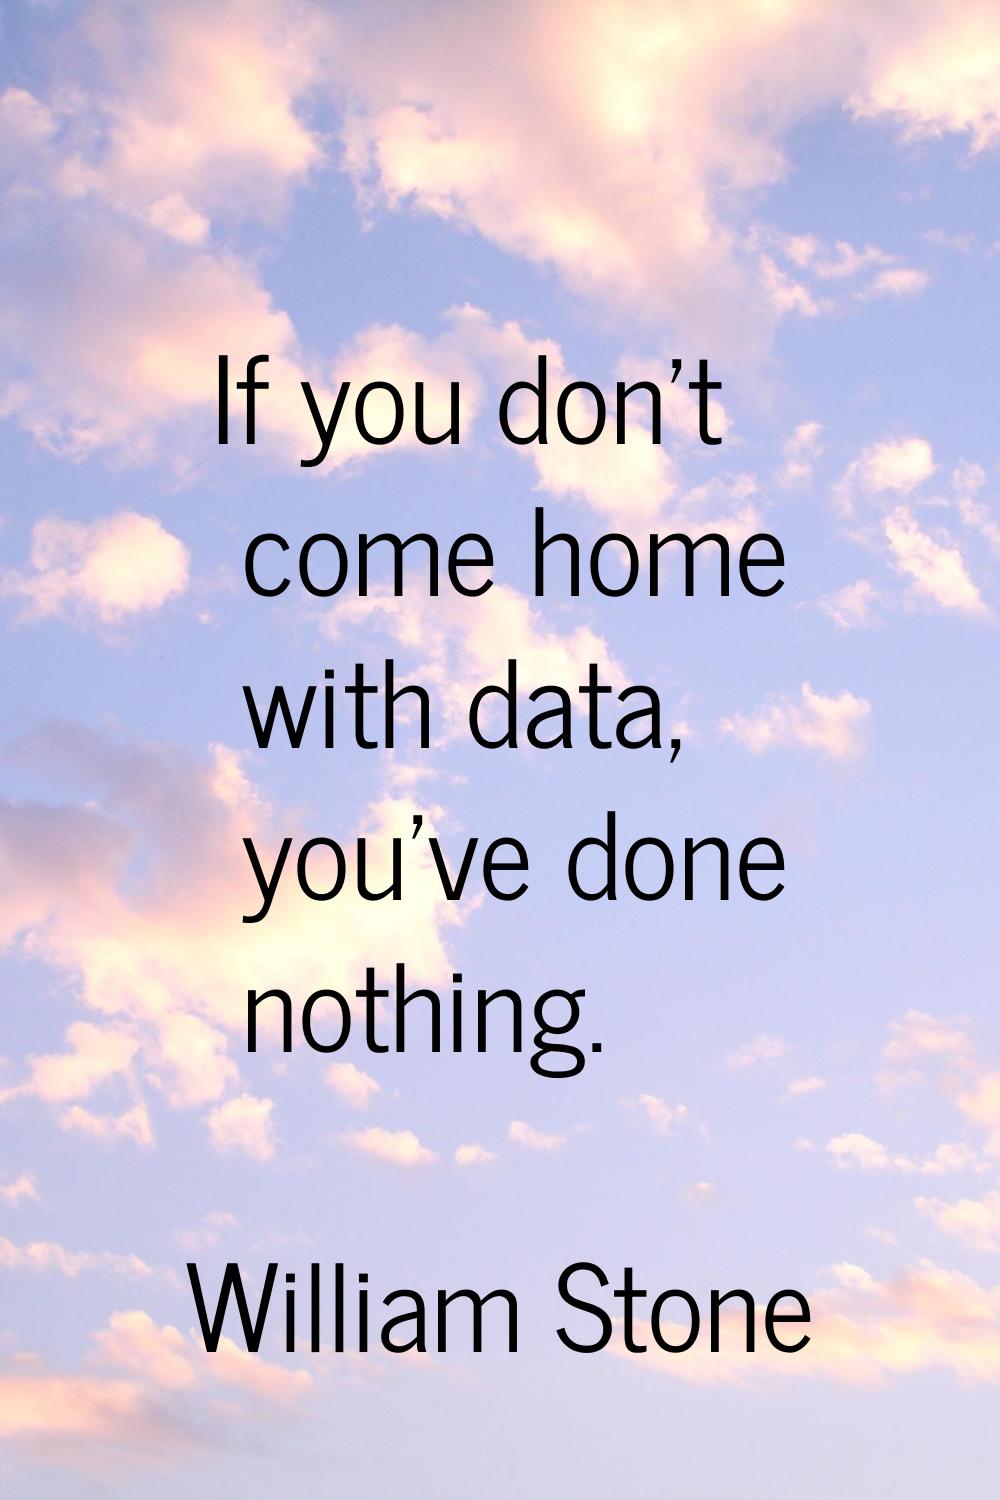 If you don't come home with data, you've done nothing.